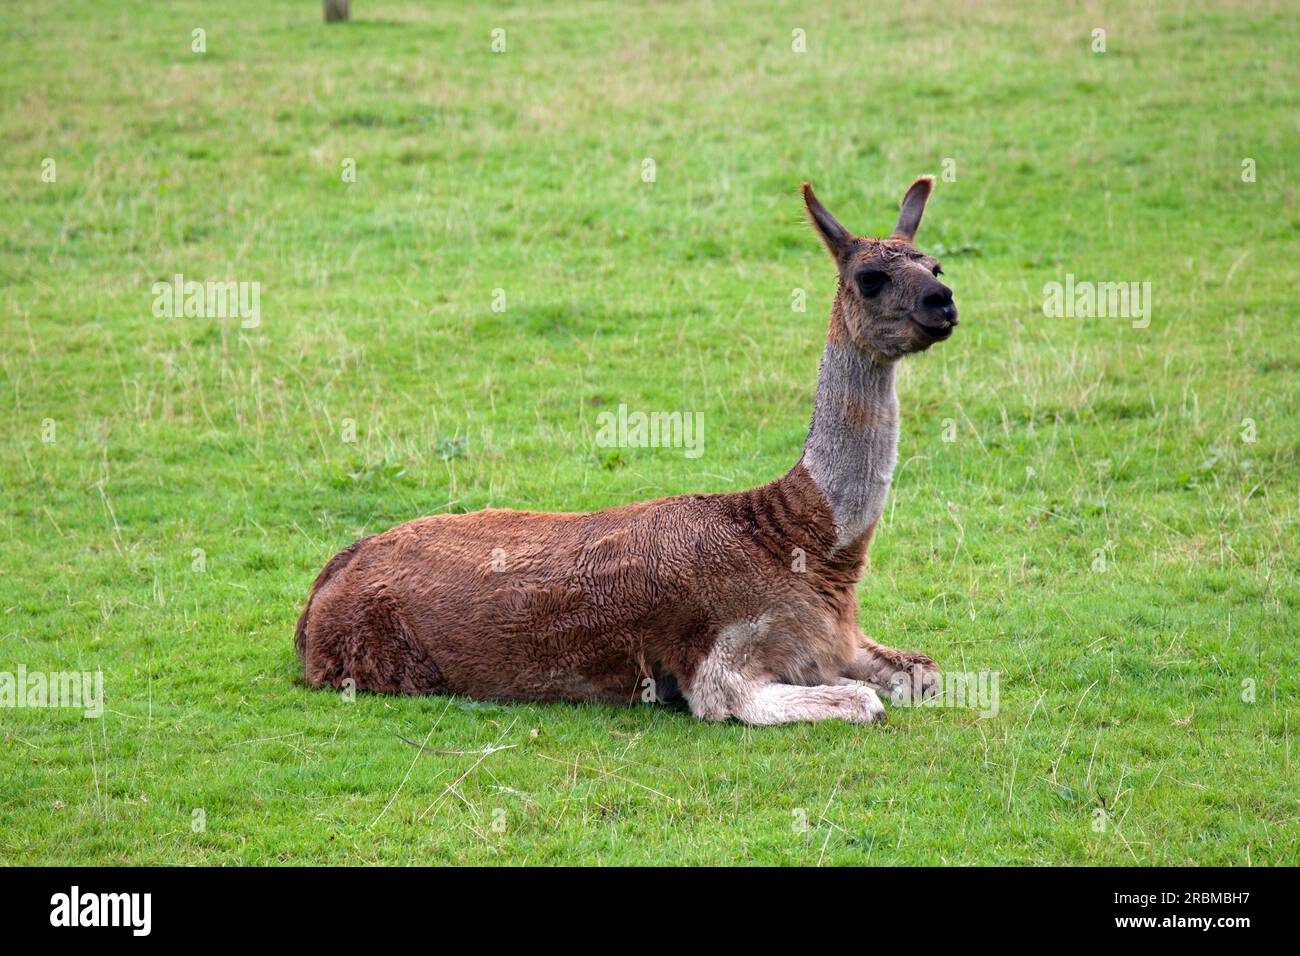 A recently shorn llama sitting on grass, watching intently Stock Photo